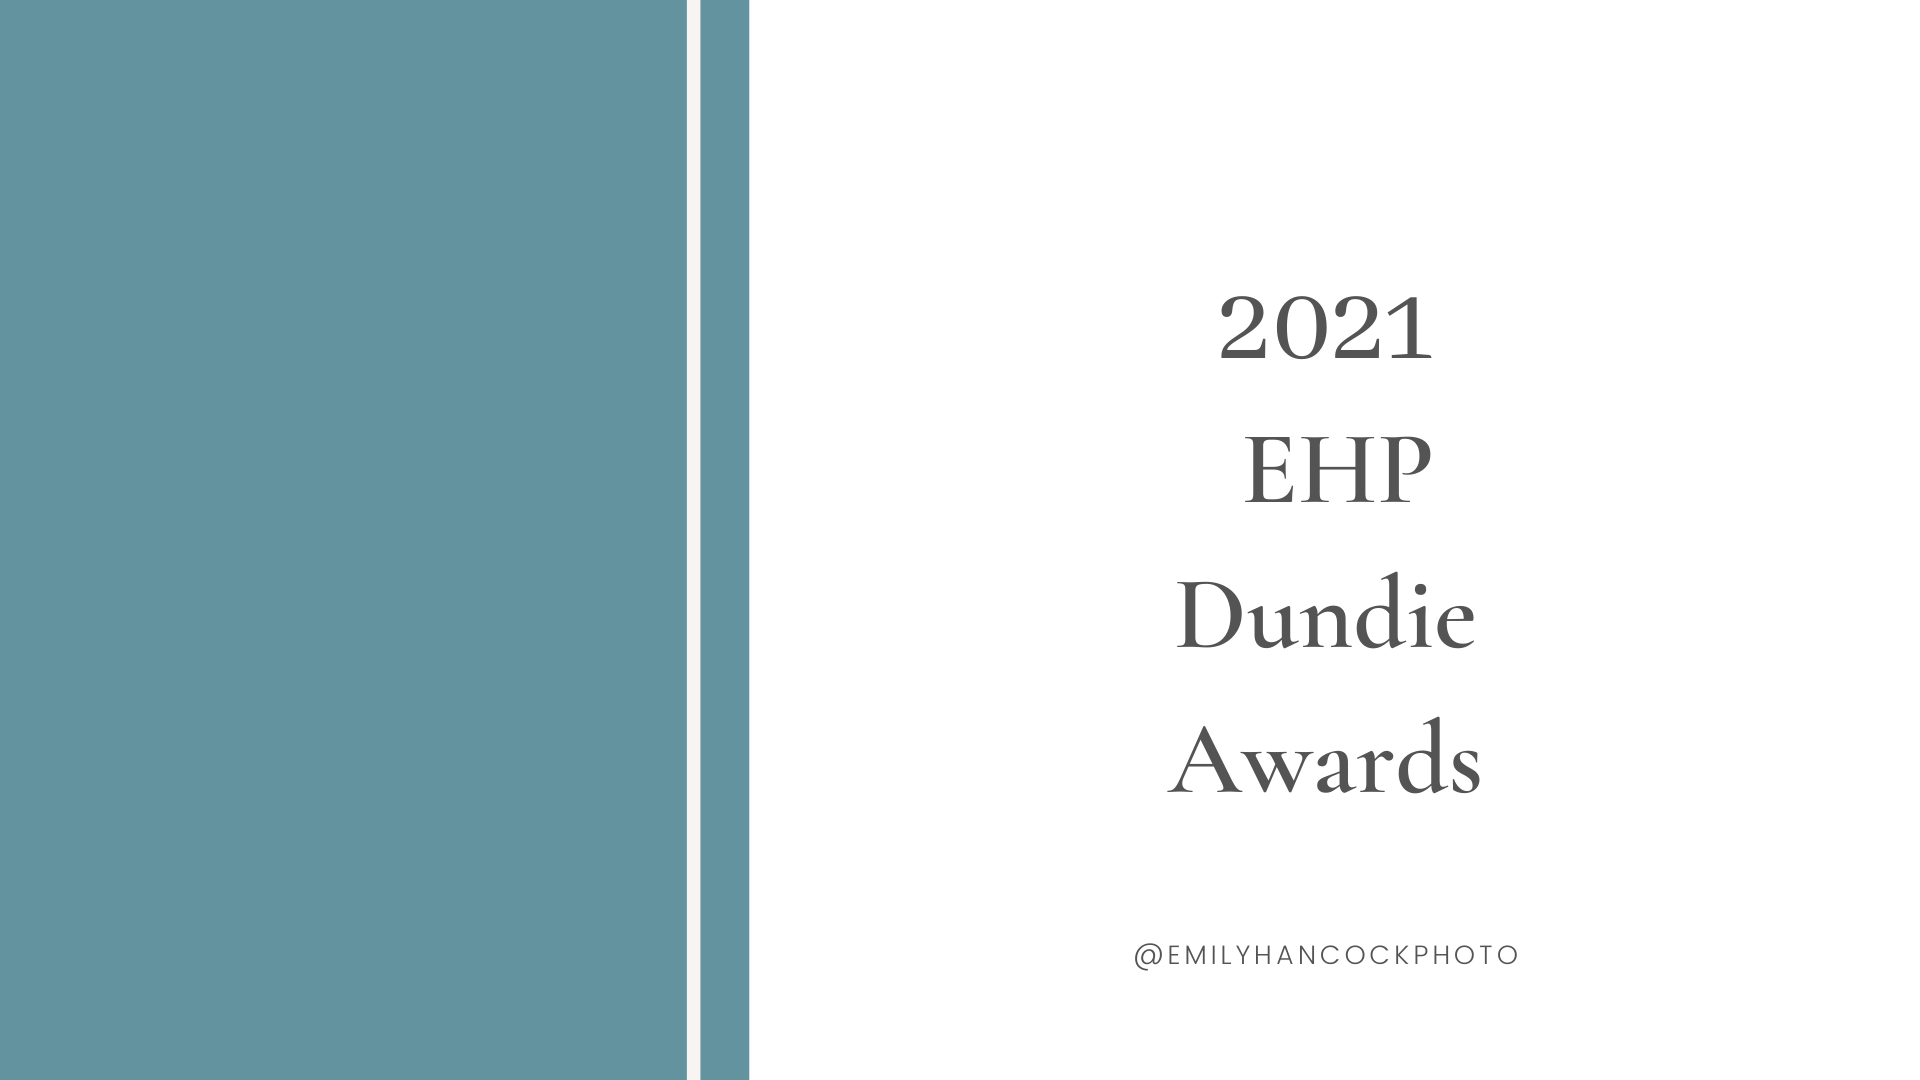 The 2021 EHP Dundie Awards